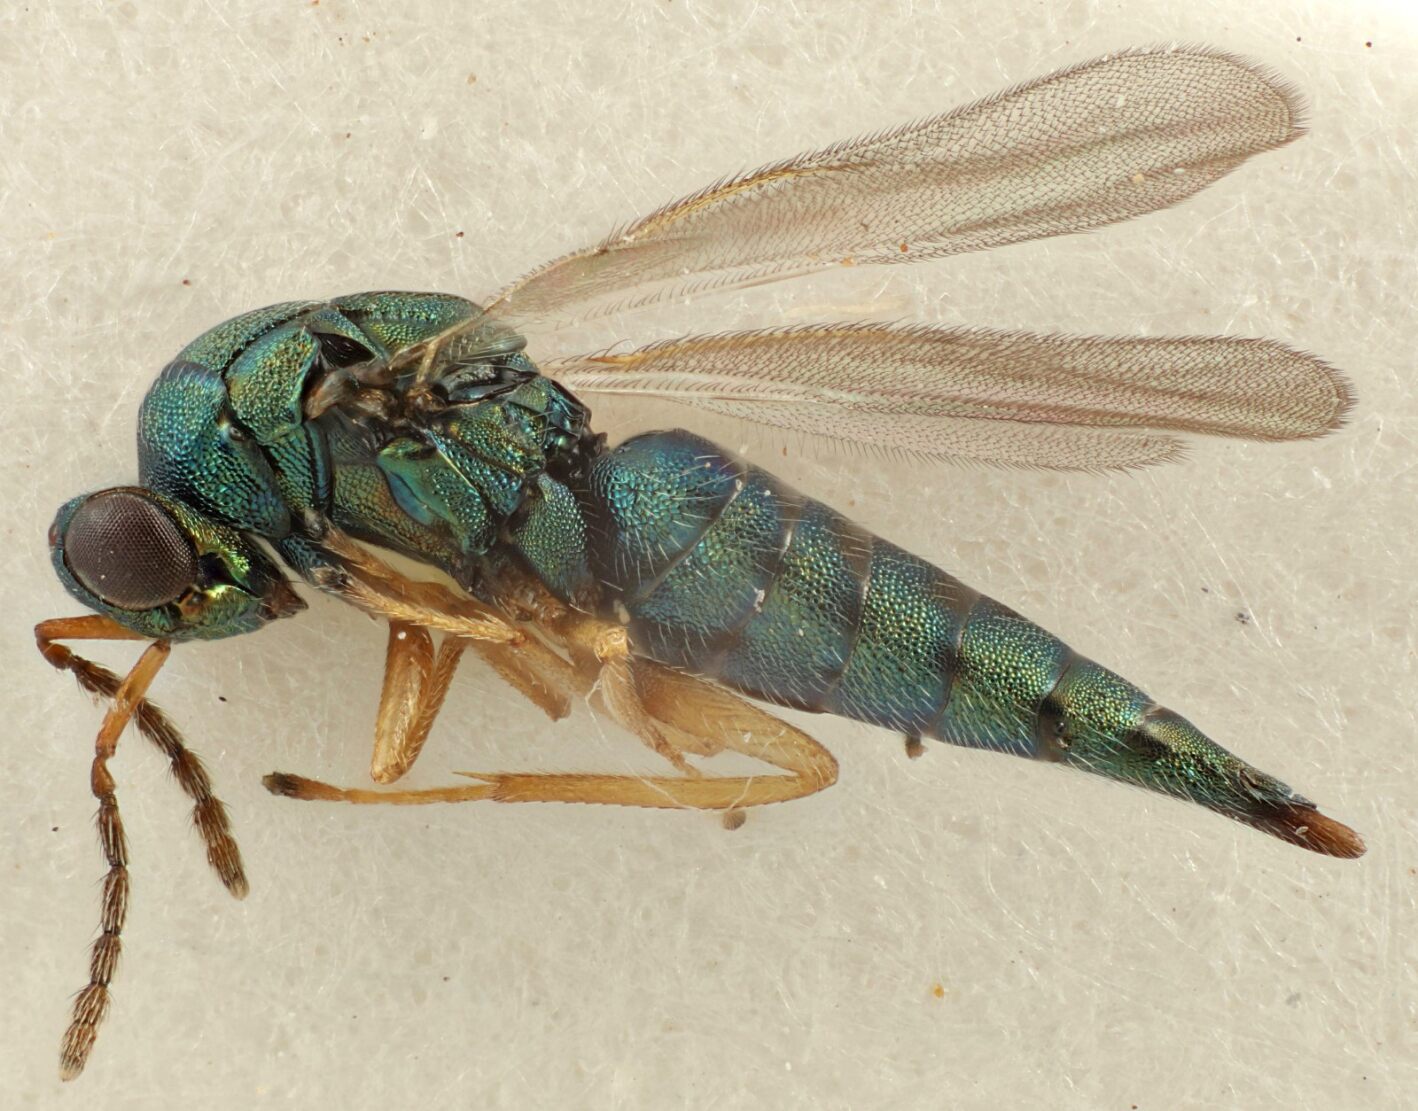 A blue-green iridescent wasp with a pointy pointy rear